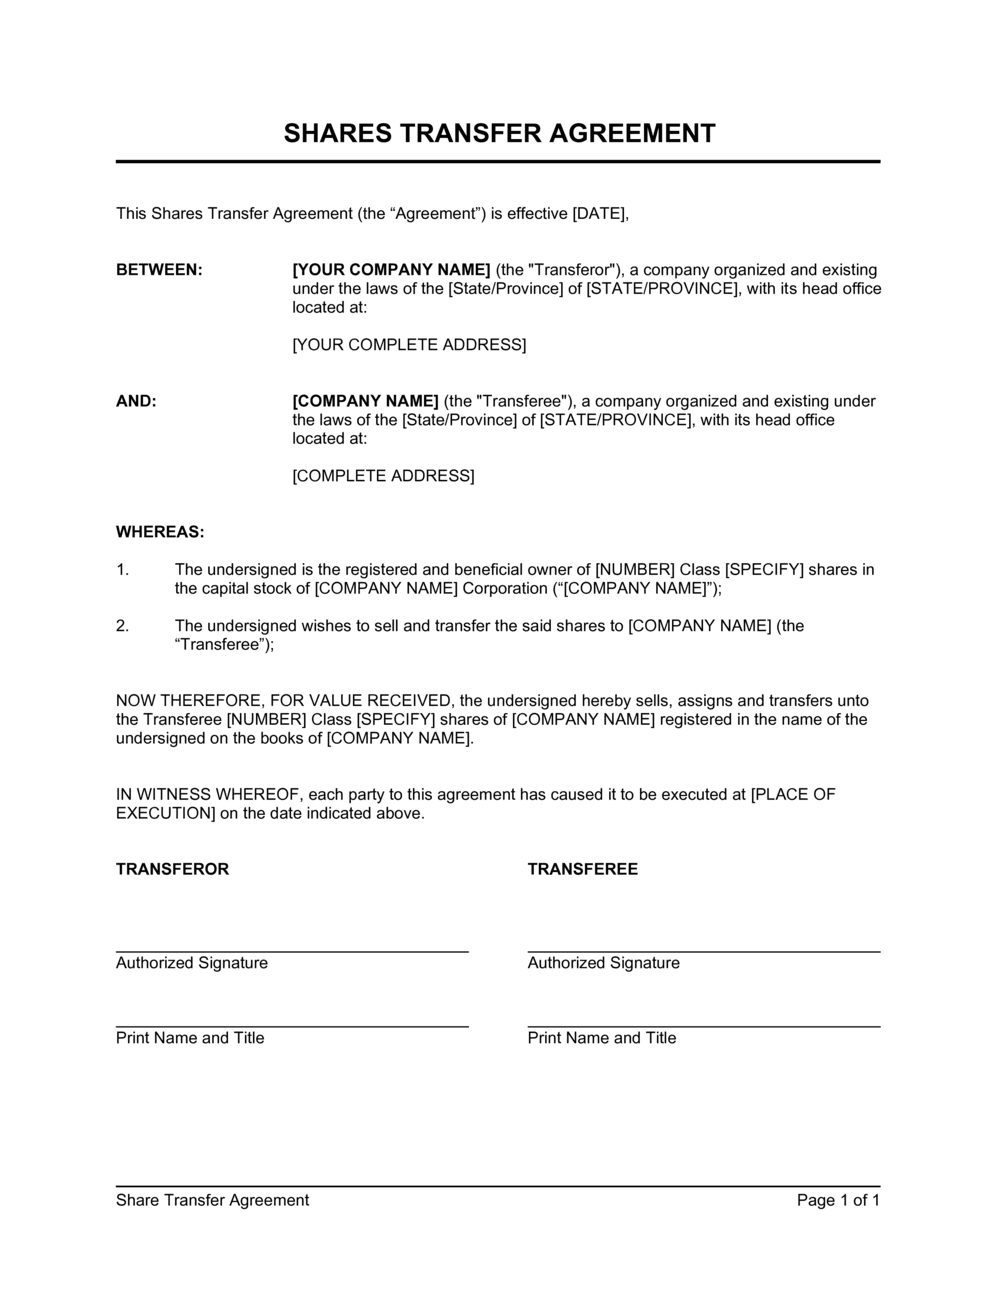 Shares Transfer Agreement Short Template  by Business-in-a-Box™ Throughout share purchase agreement template singapore